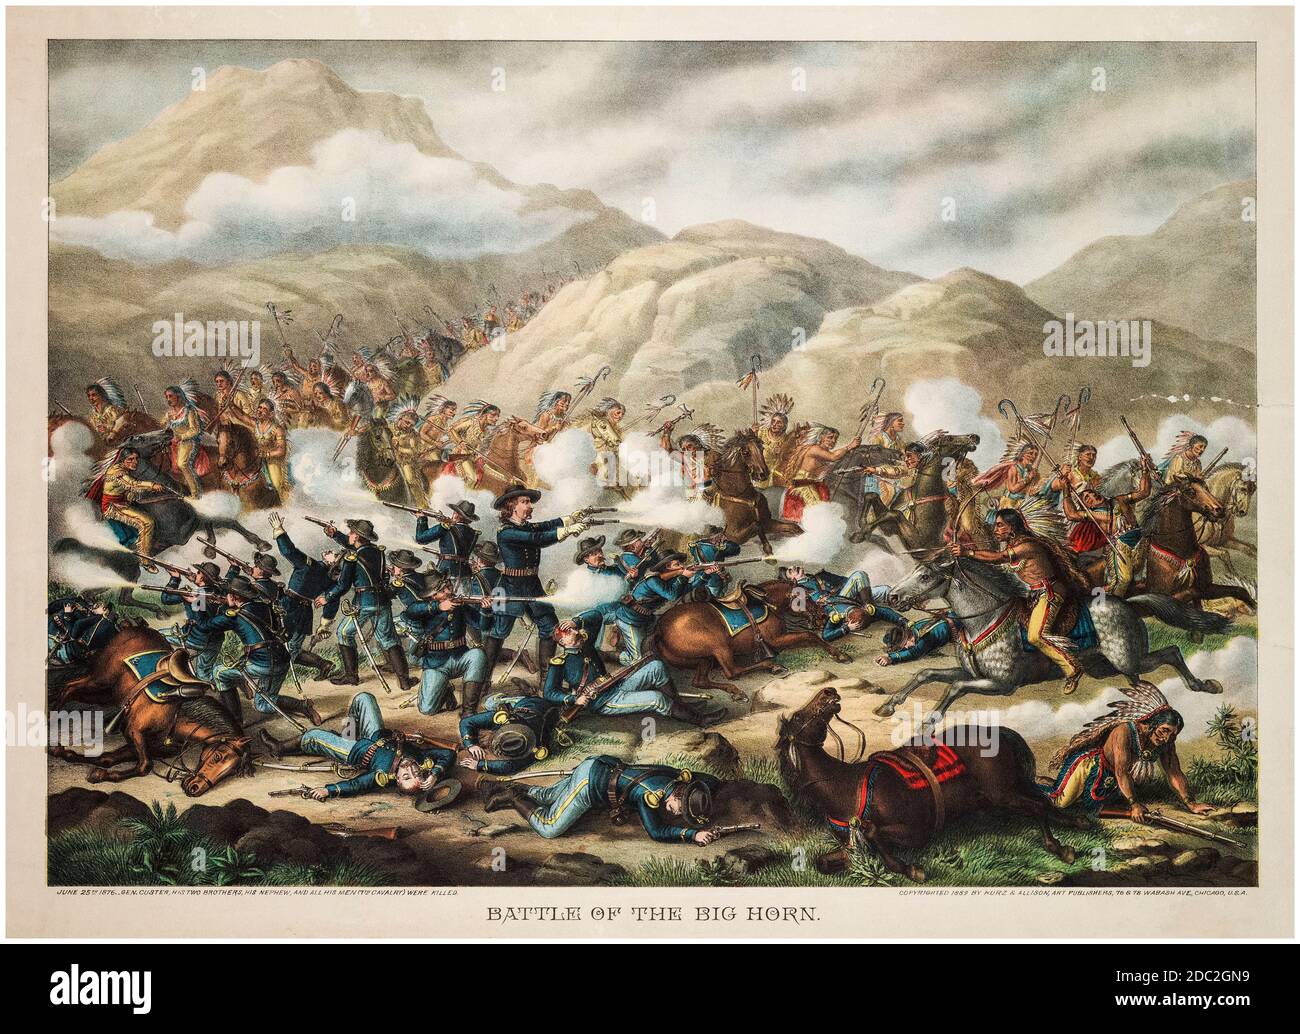 Battle of the Little Bighorn, June 25th 1876, Custer's Last Stand, print by Kurz and Allison, 1889 Stock Photo